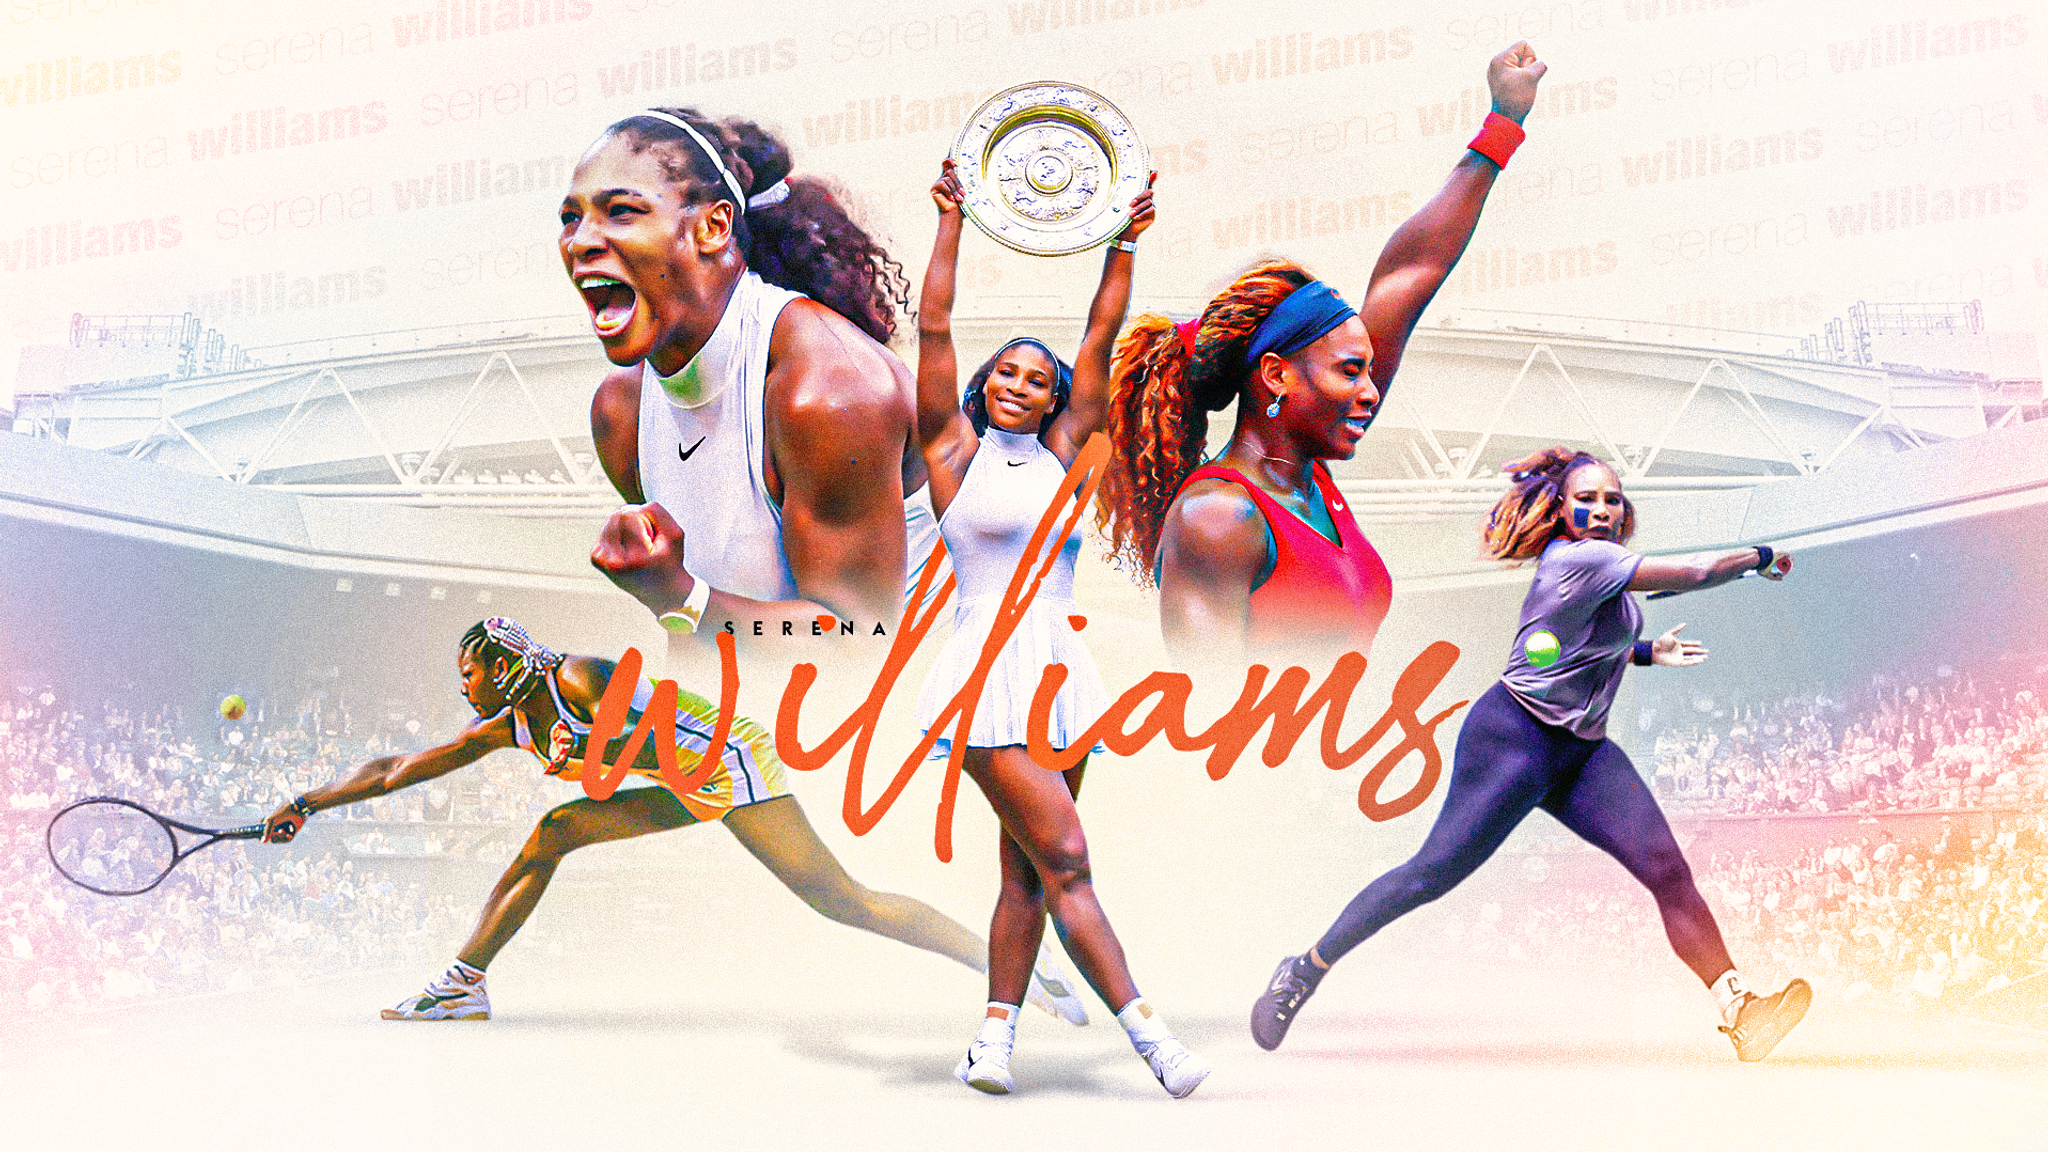 Serena Williams The career of a tennis icon Tennis News Sky Sports